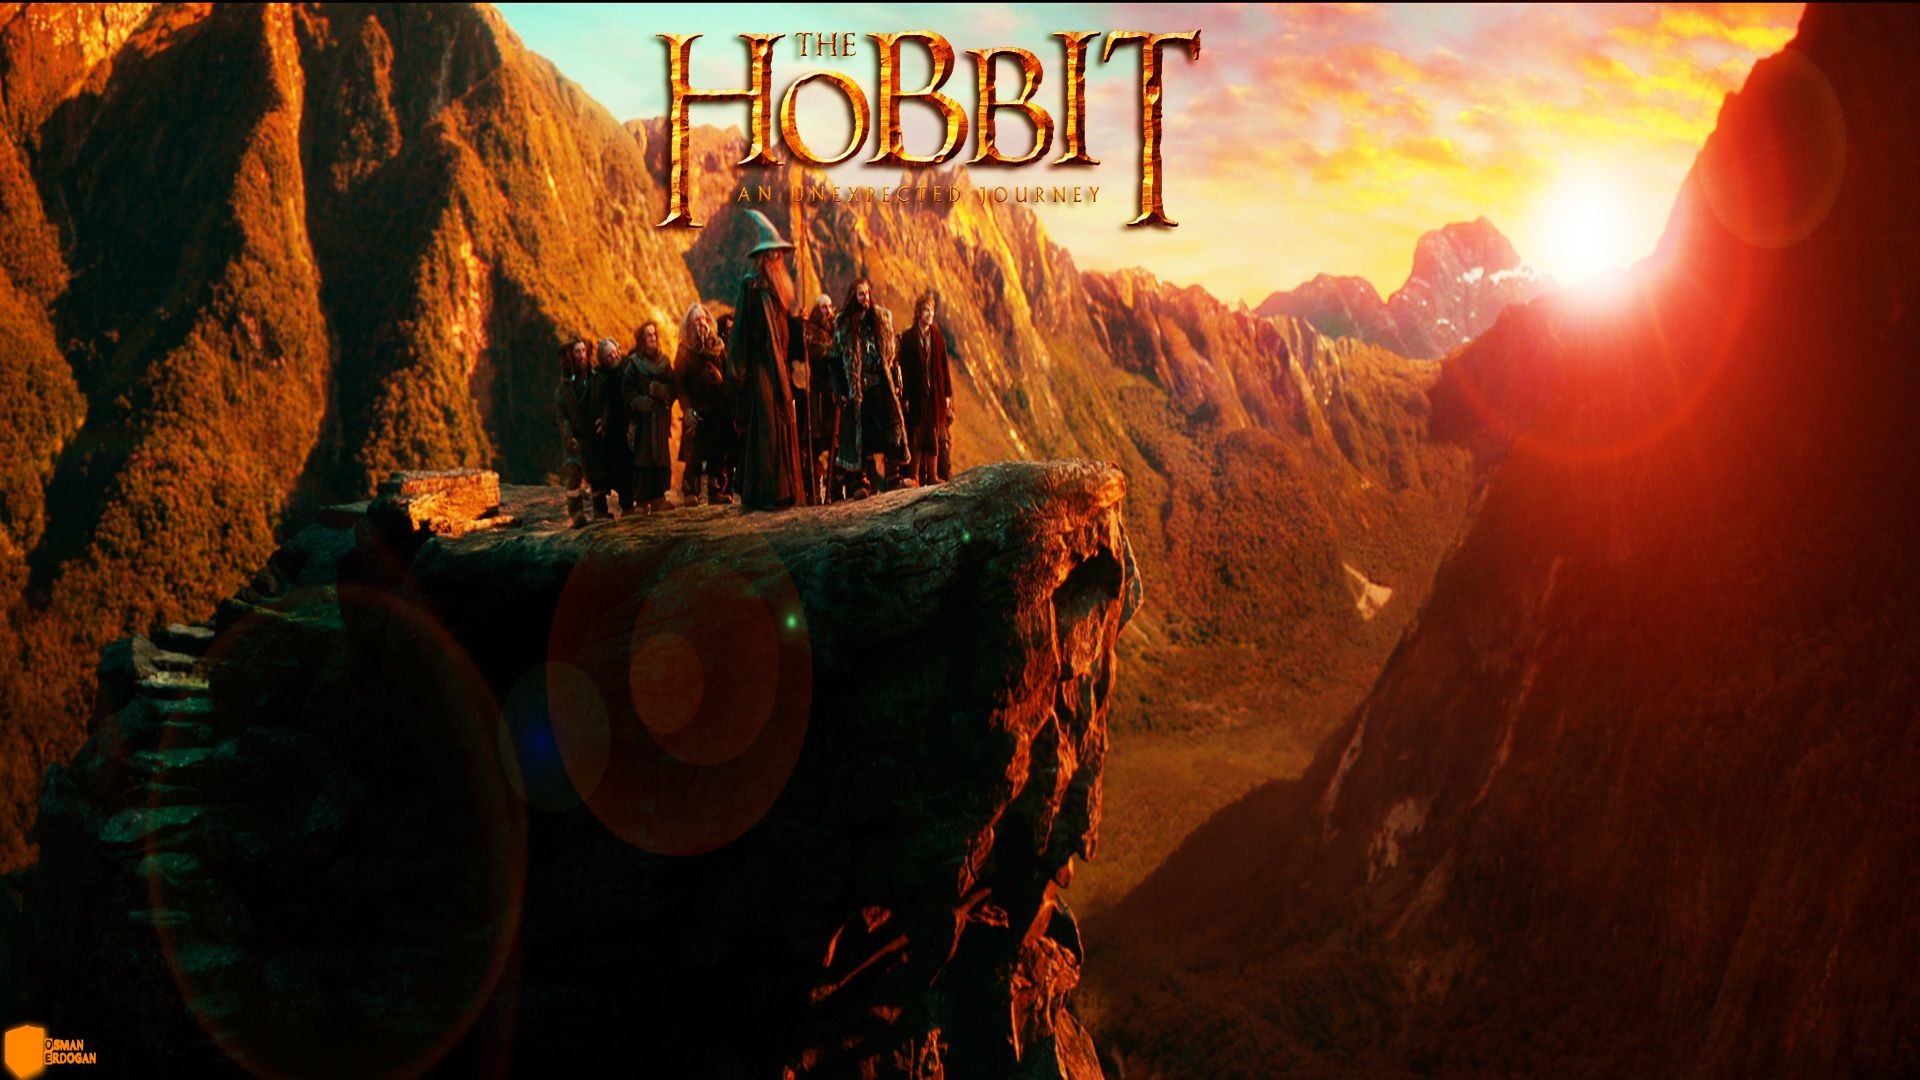 1920x1080 Hobbit HD Wallpapers Free Download – Unique HD Photos for desktop and mobile